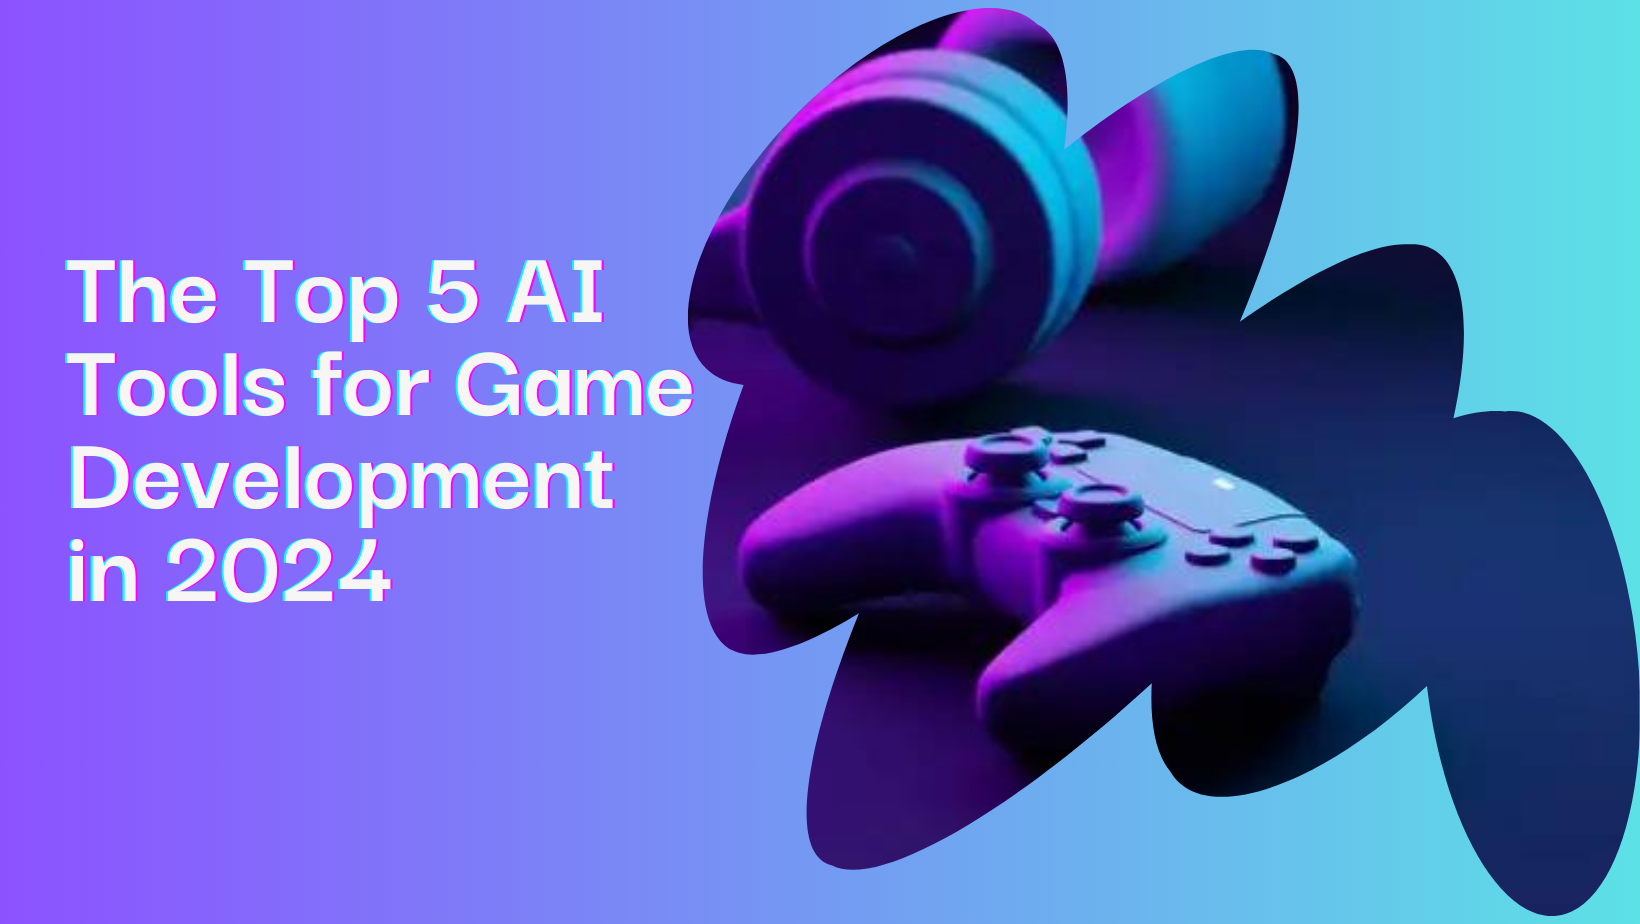 The Top 5 AI Tools for Game Development in 2024 - The Top 5 AI Tools for Game Development in 2024